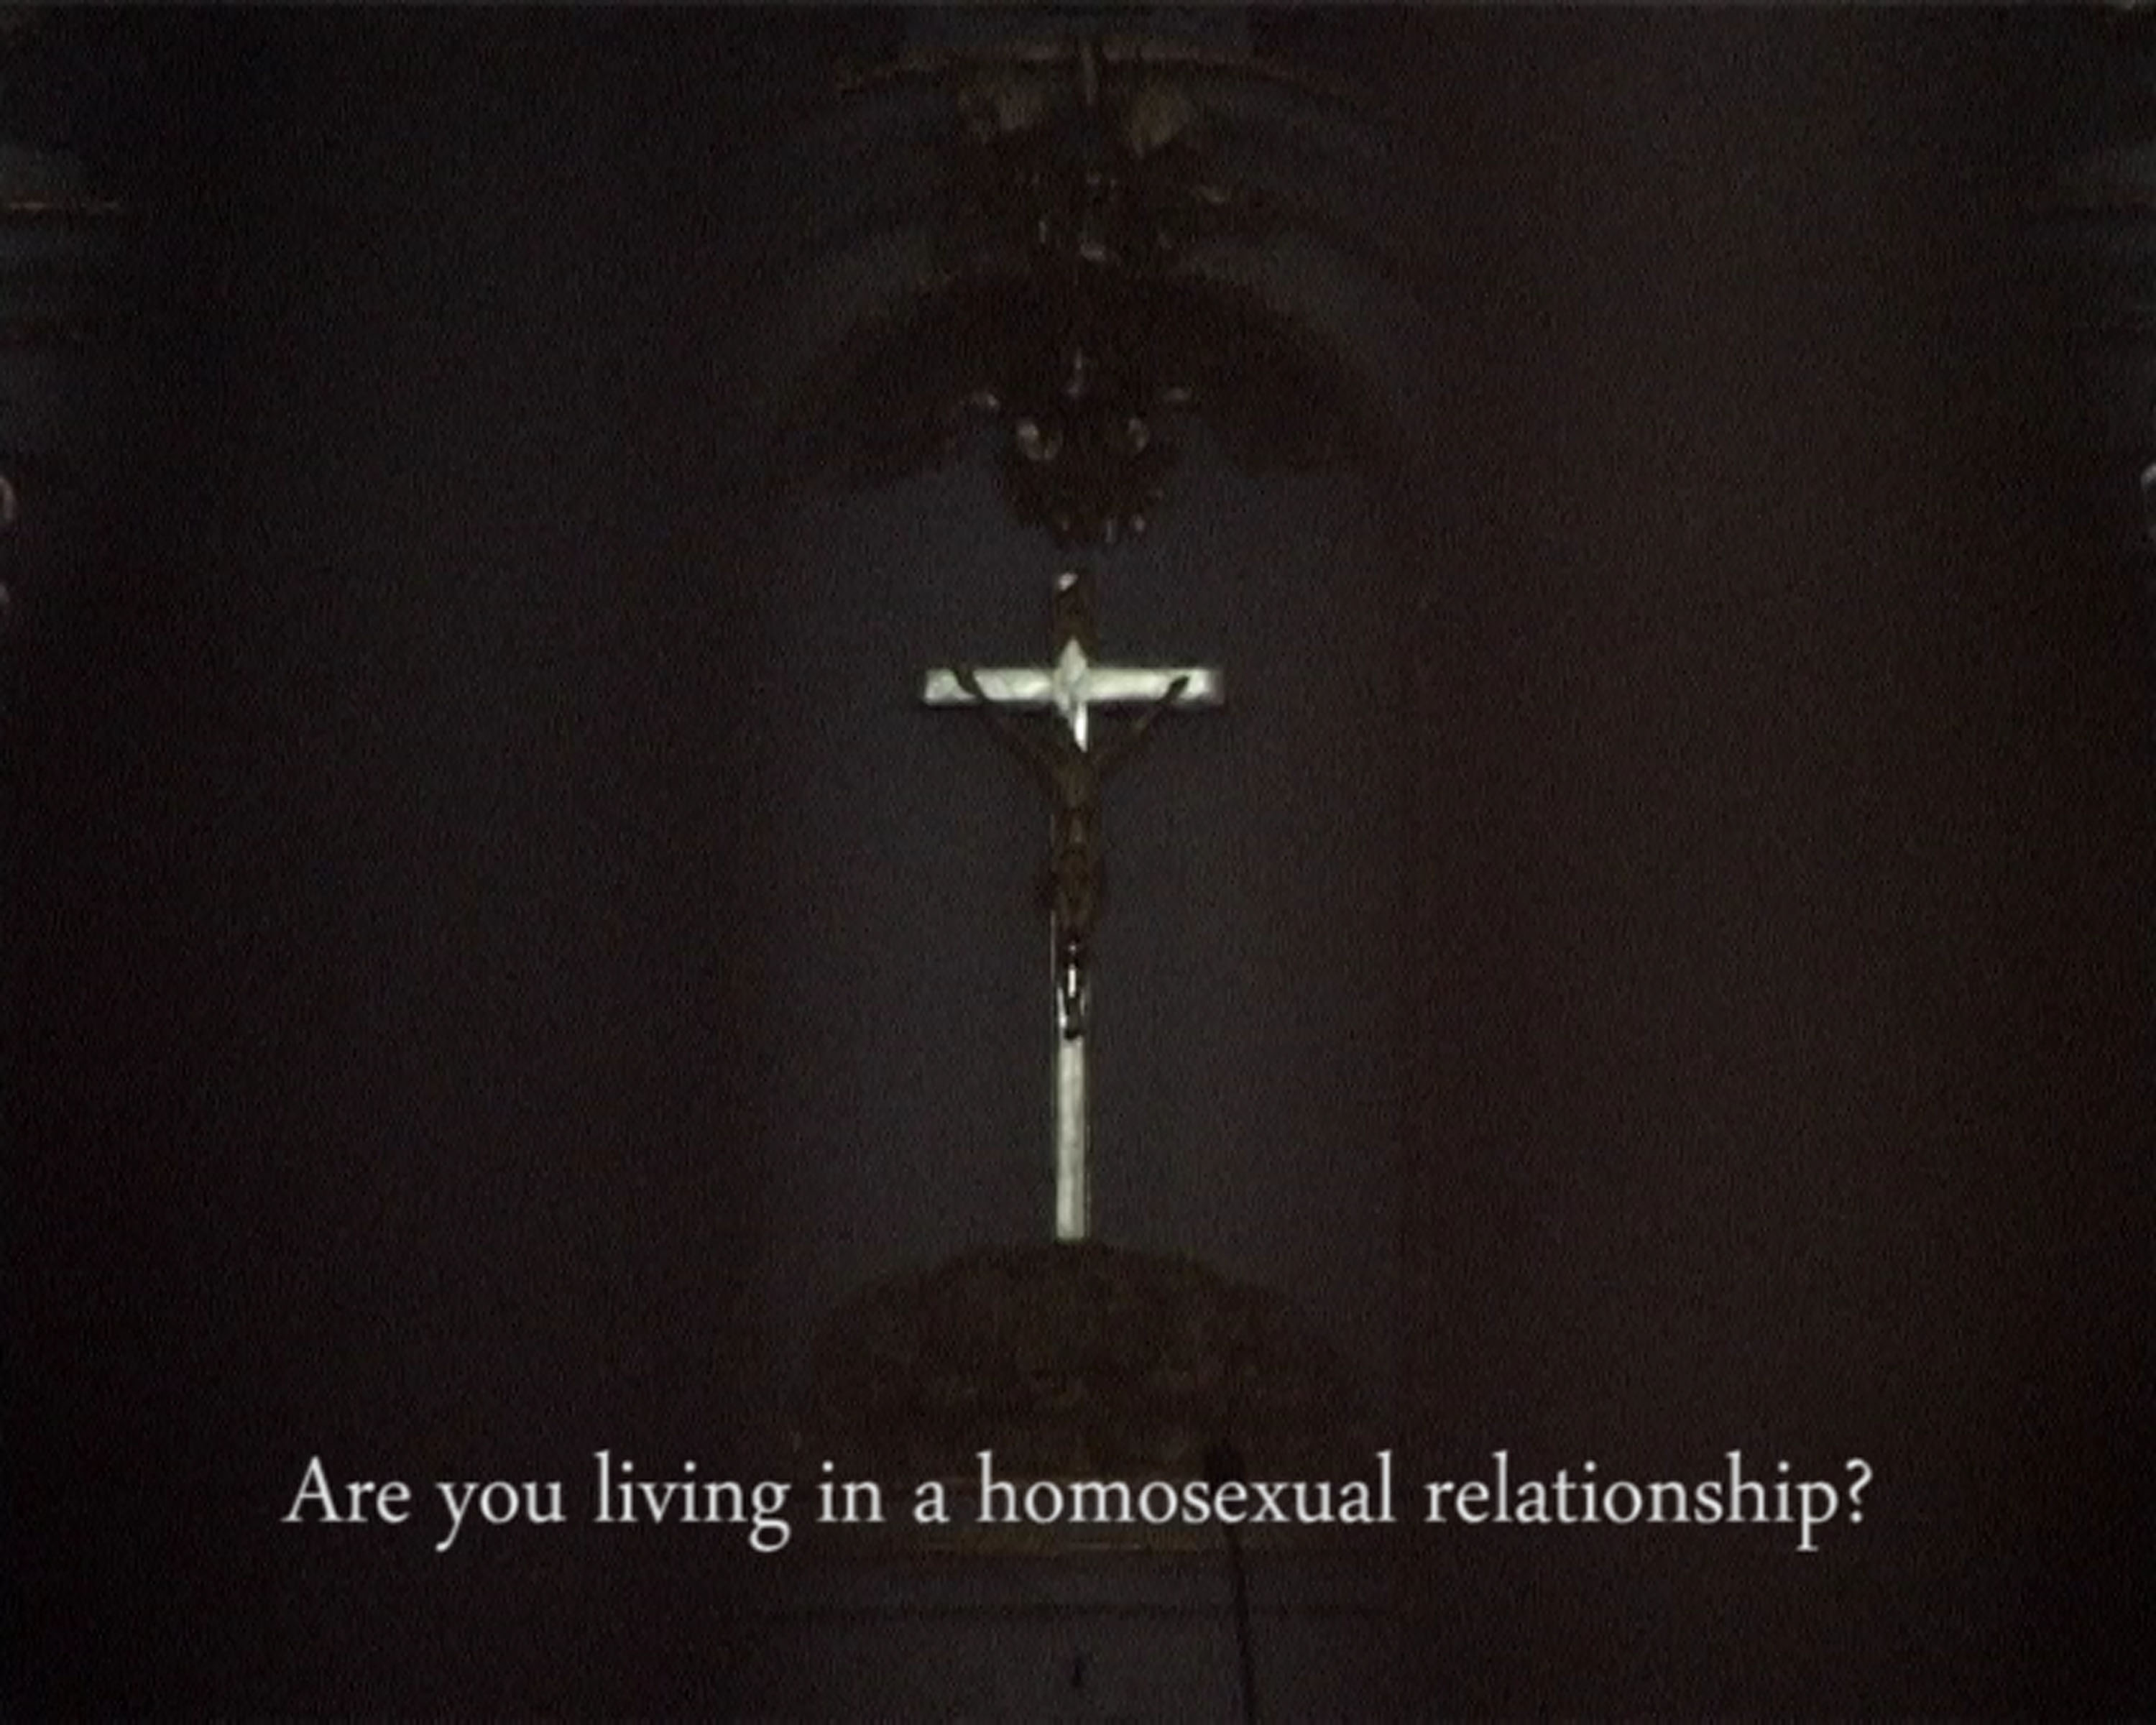 The video shows the relation between the Church and homosexuality through the real confession between me and the priest.